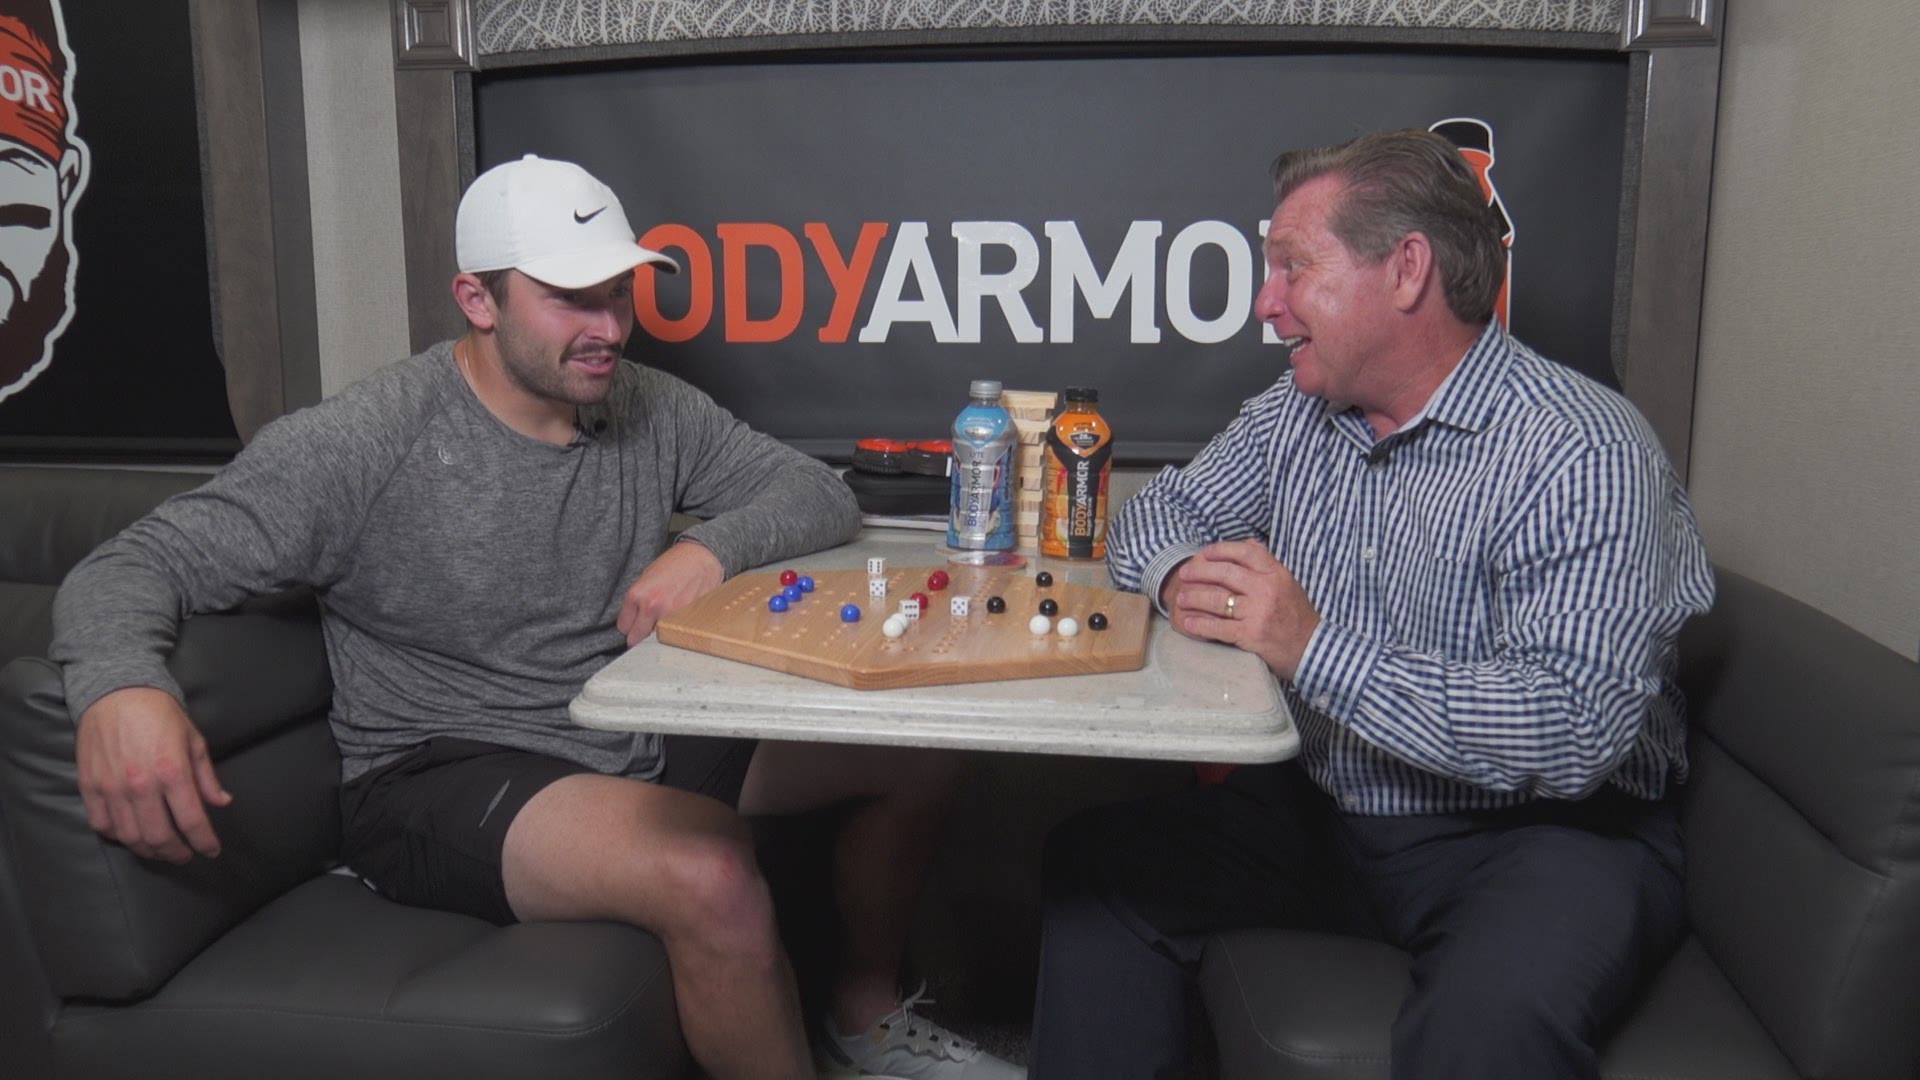 Cleveland Browns QB Baker Mayfield discussed the upcoming season, his recent marriage and showed off his new RV during an exclusive interview with WKYC's Jim Donovan at training camp.